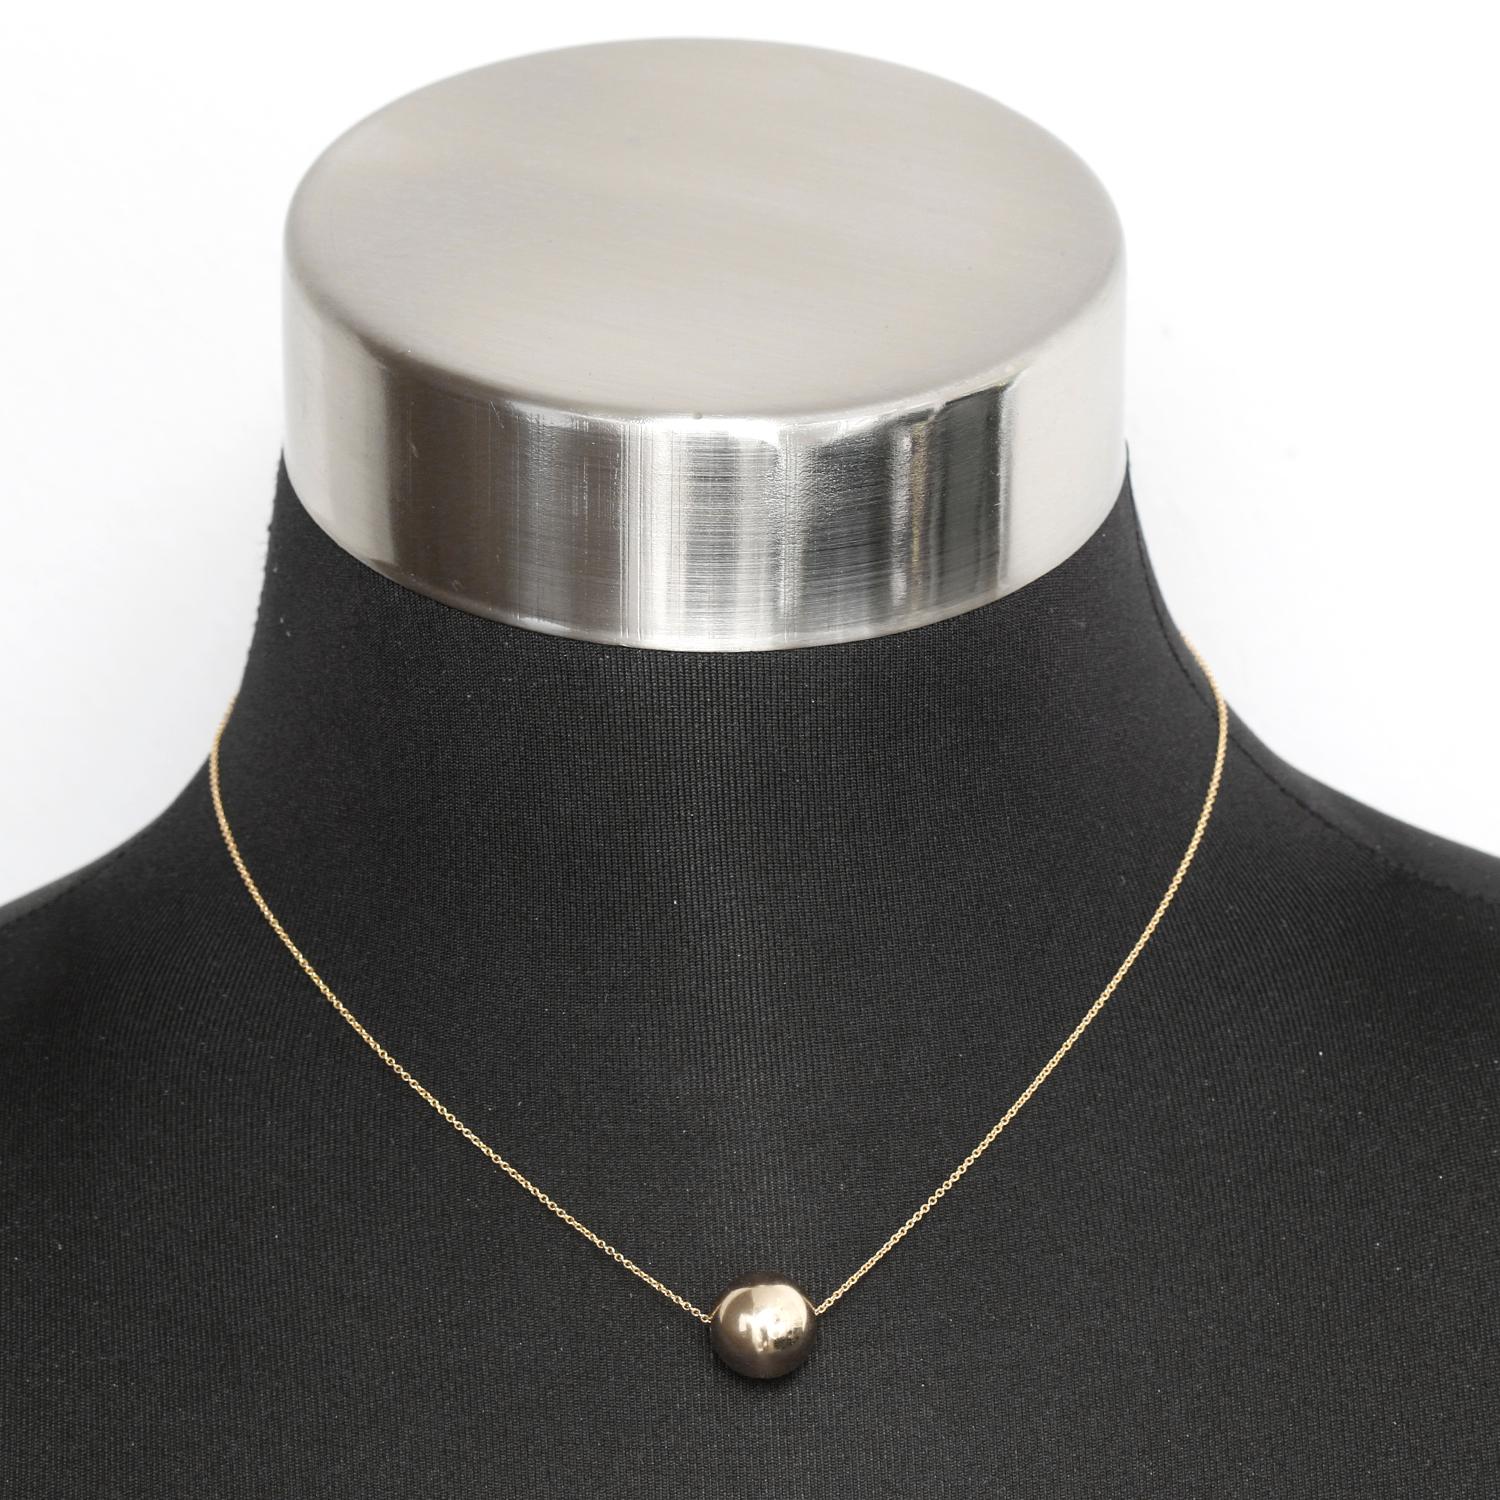 Single 14K Yellow Gold Ball Necklace  - 14K Yellow Gold 12 MM ball on a 14K Yellow gold chain. Total length 16 inch chain. Total weight 1.6 grams.